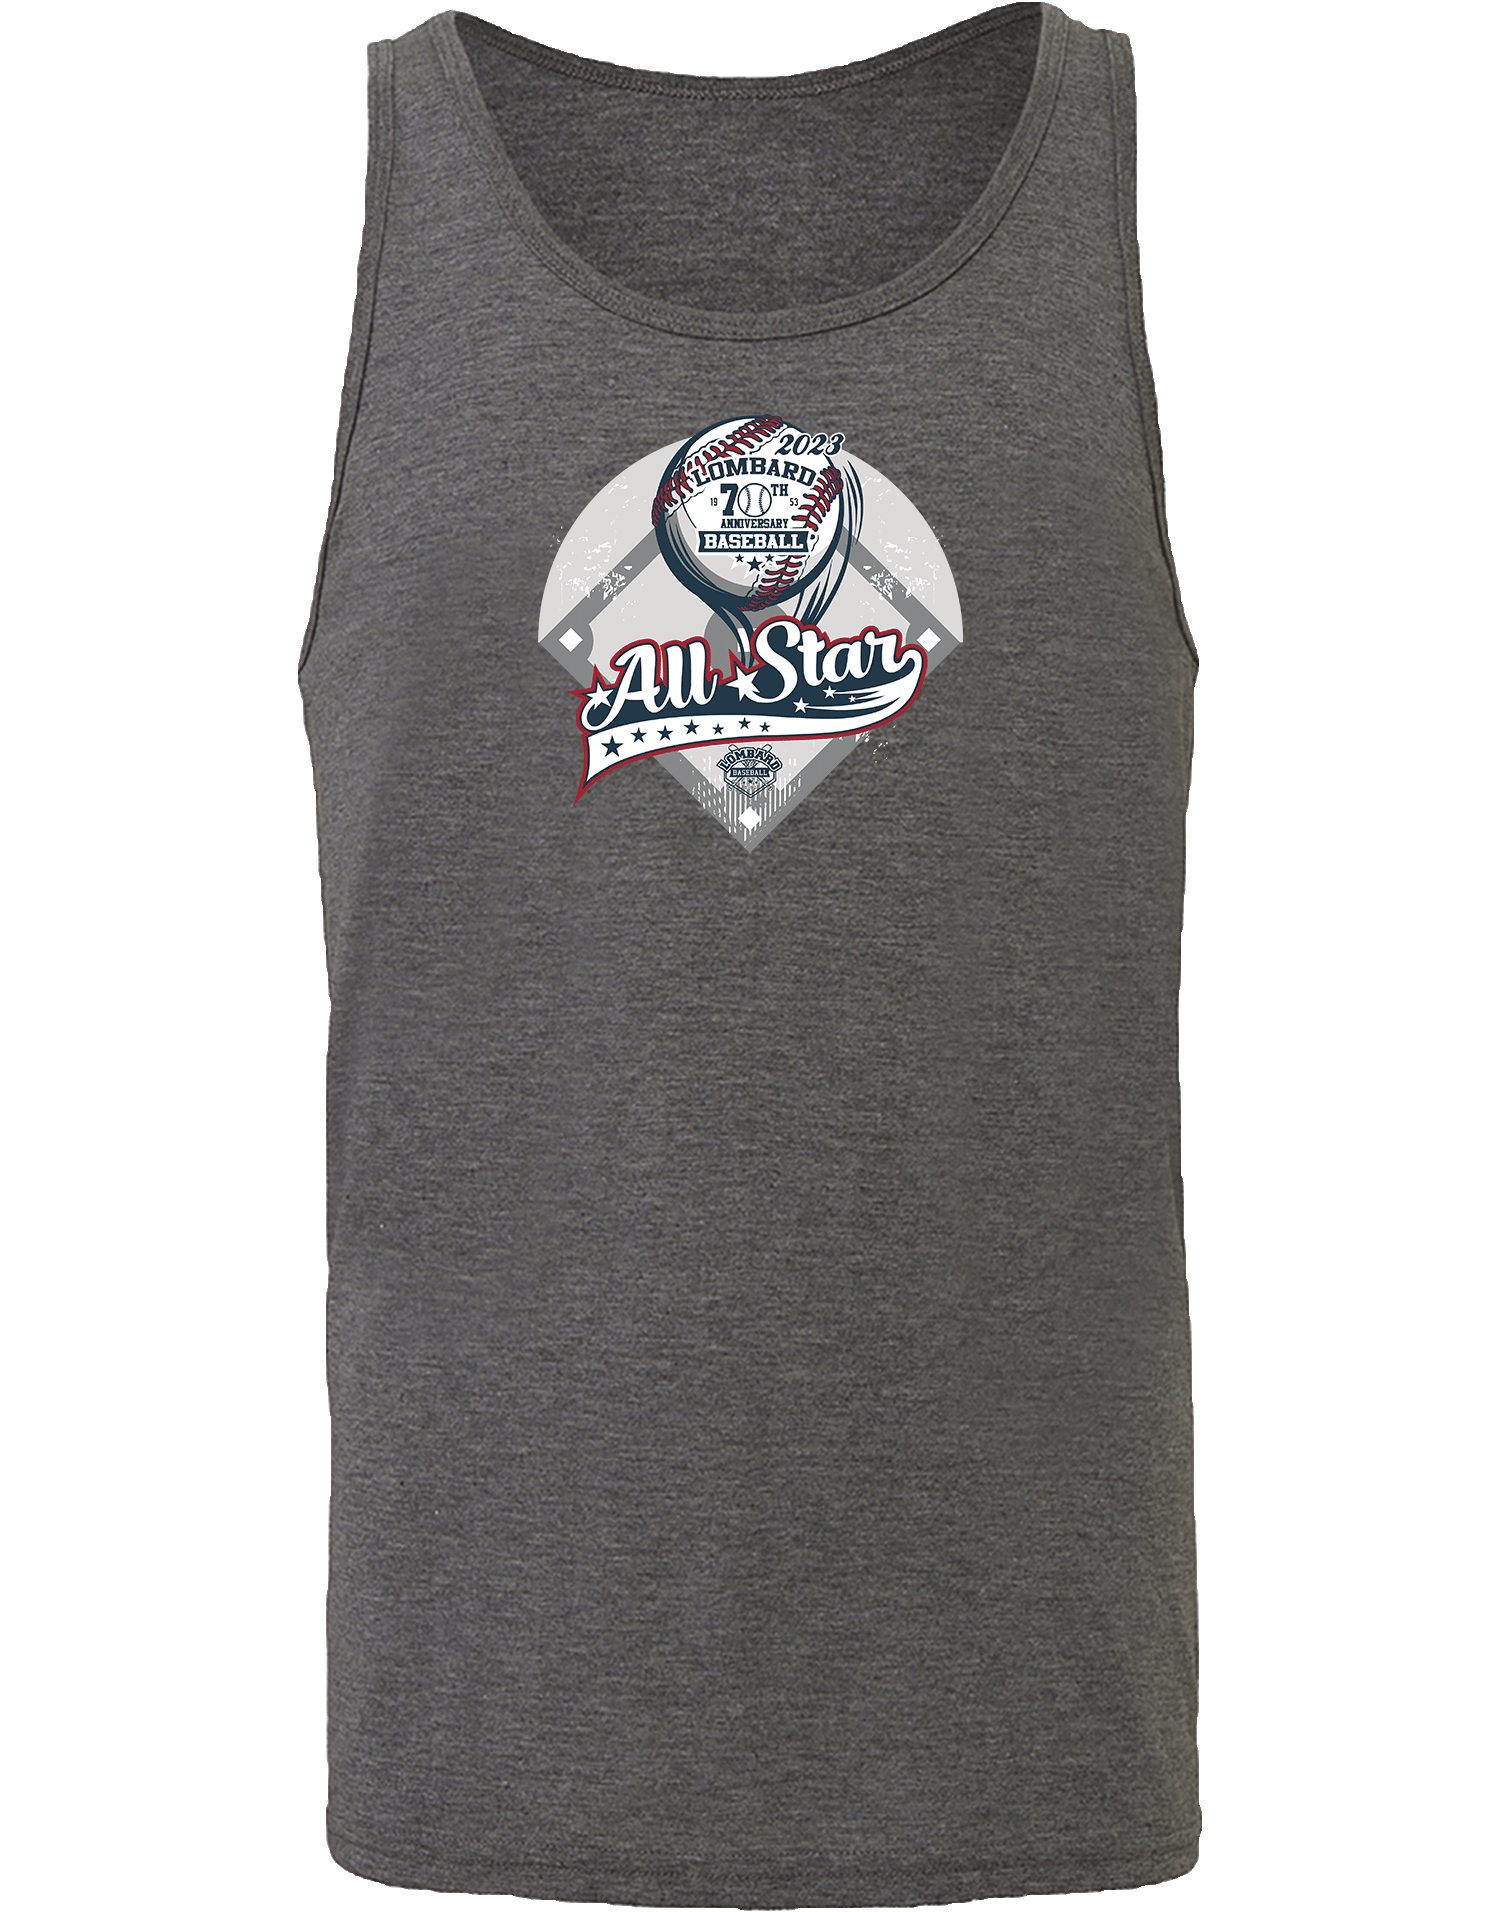 TANK TOP - 2023 Lombard Baseball League's 70th Anniversary All Star Event